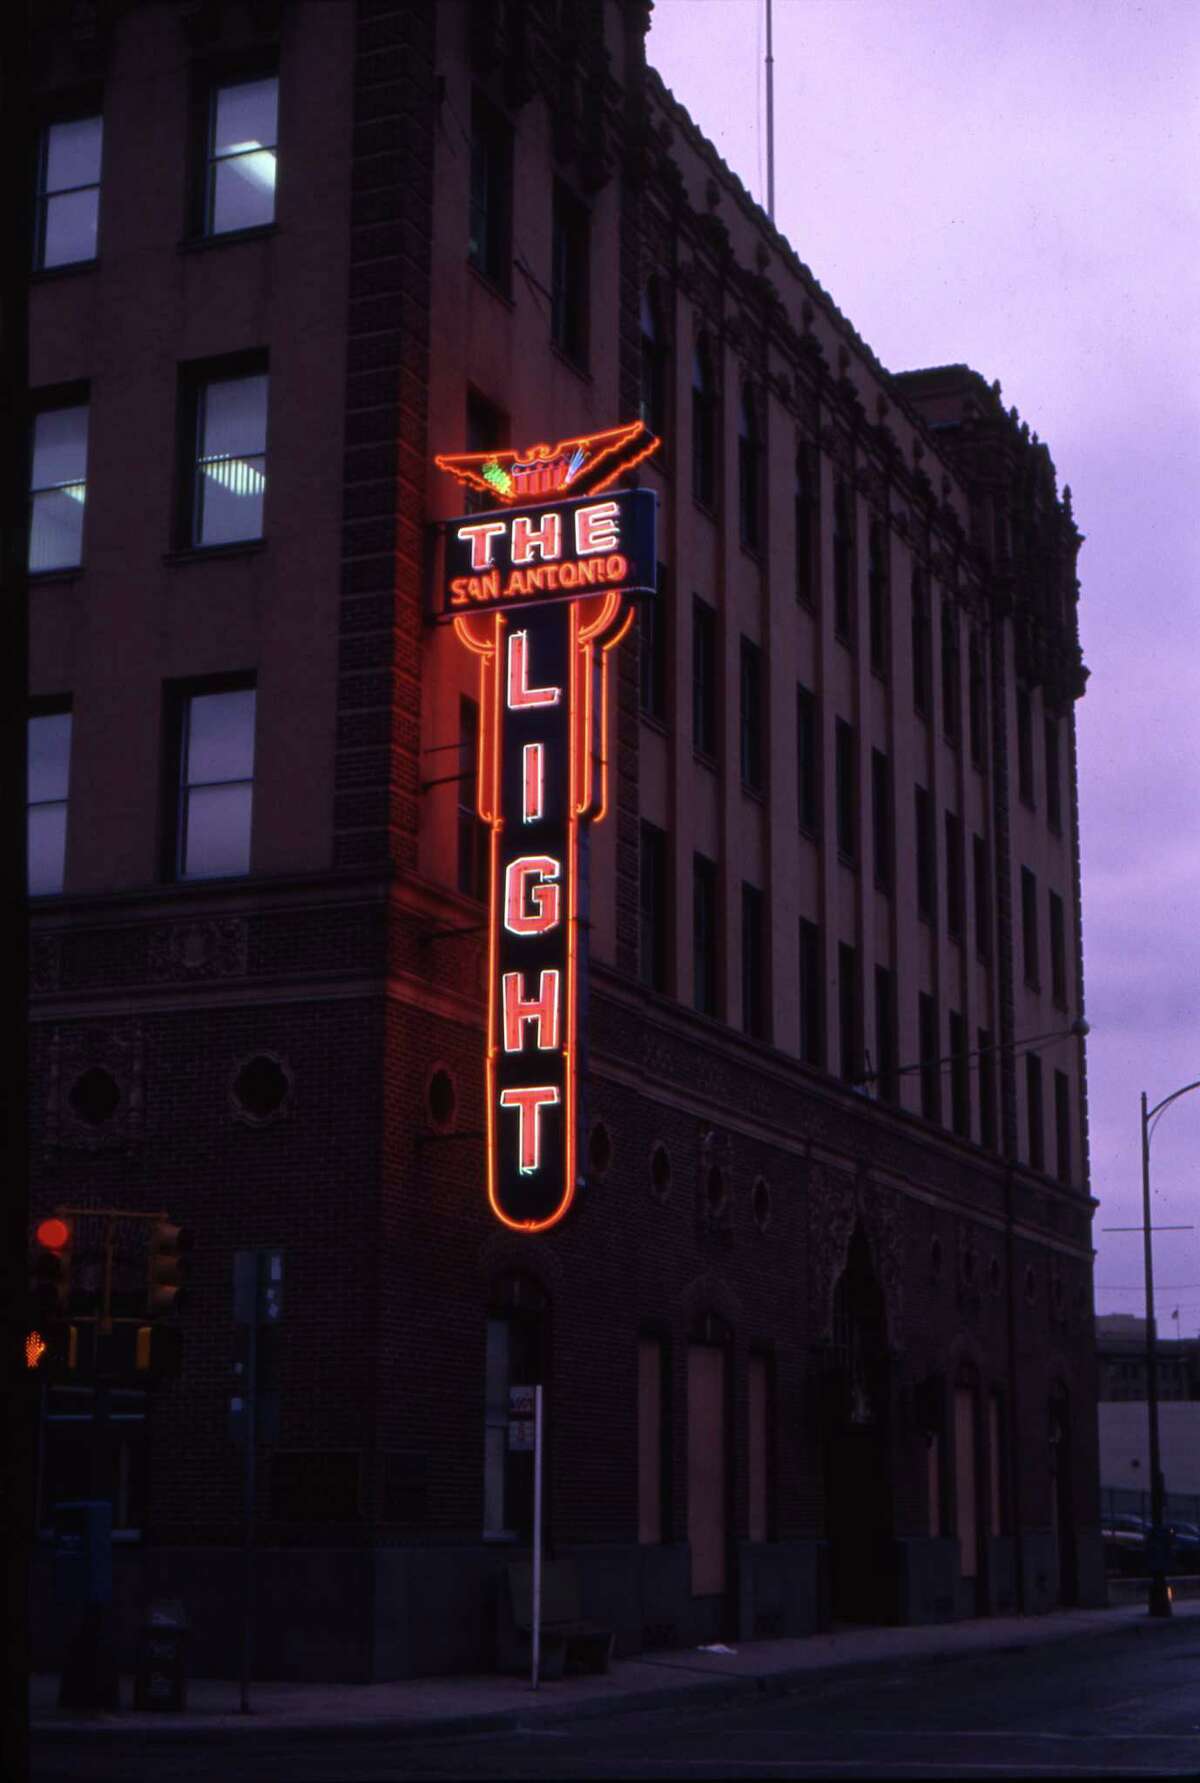 1989 photograph of the San Antonio Light building on Broadway and McCullough. The photograph was taken by former Light staff photographer James Blaylock.